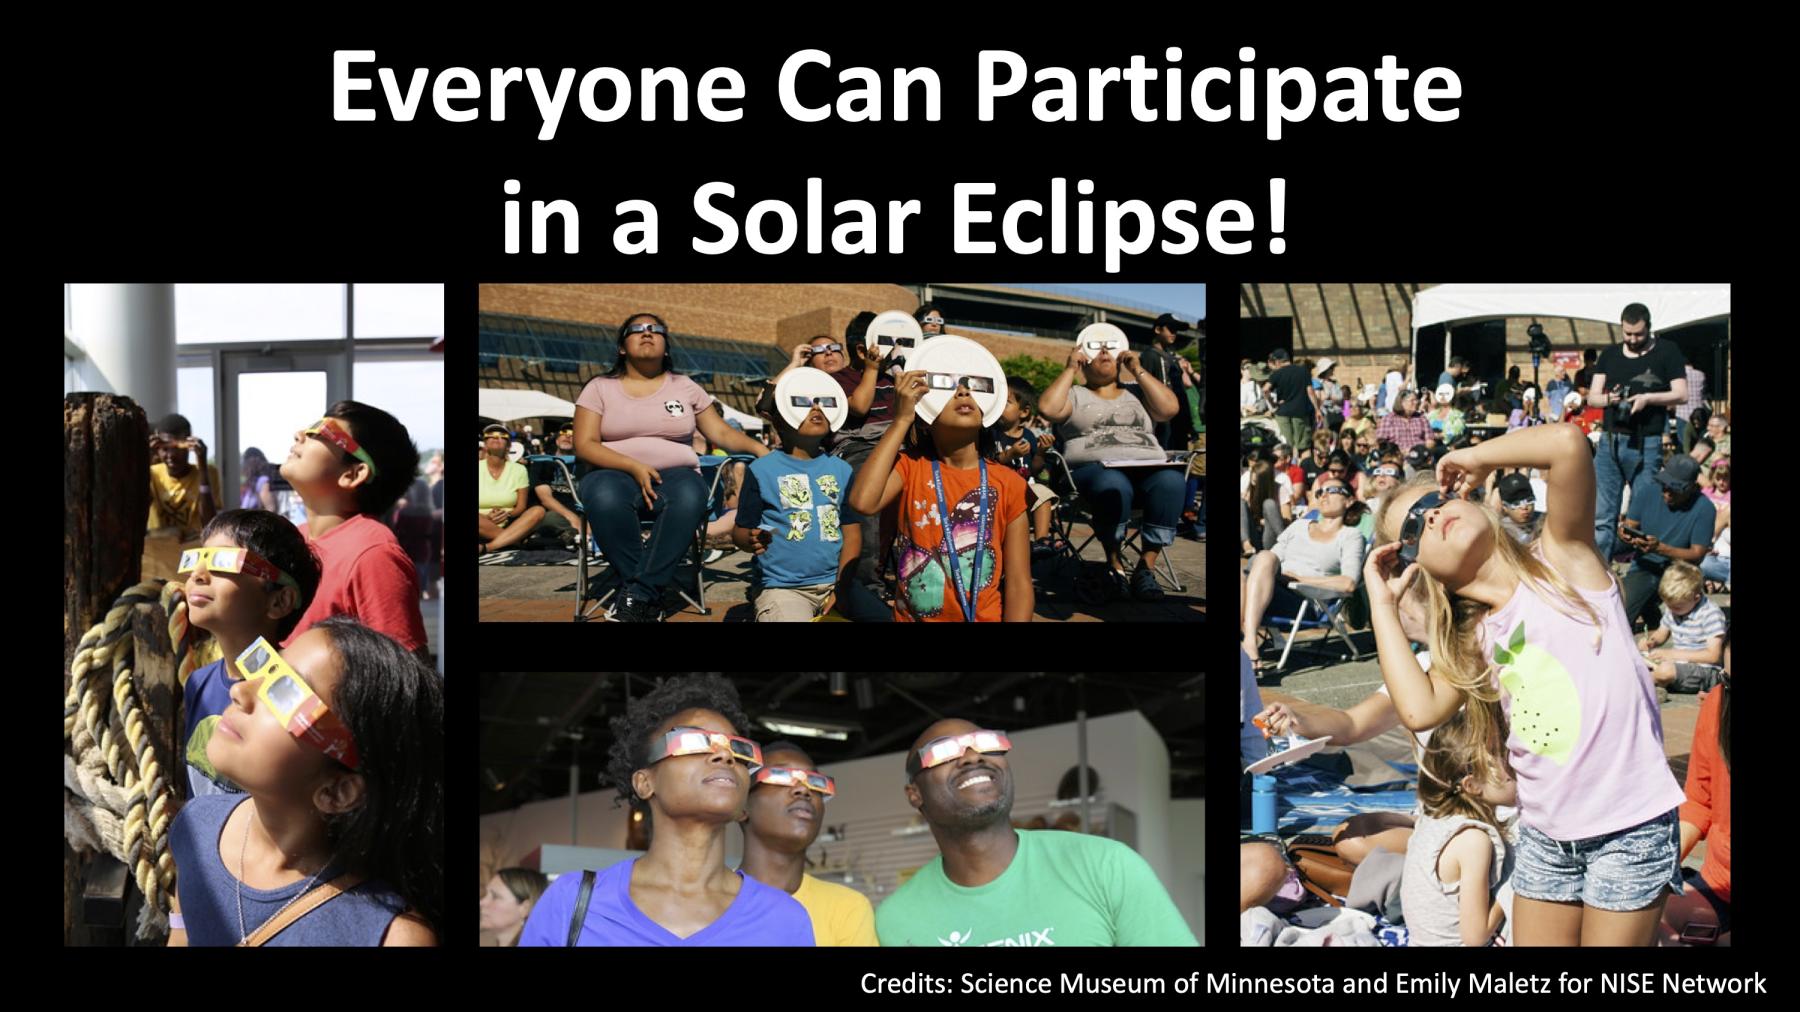 NISE Network_Solar Eclipse slides 2023 -  everyone can participate in a solar eclipse showing many people safely viewing a solar eclipse.jpg